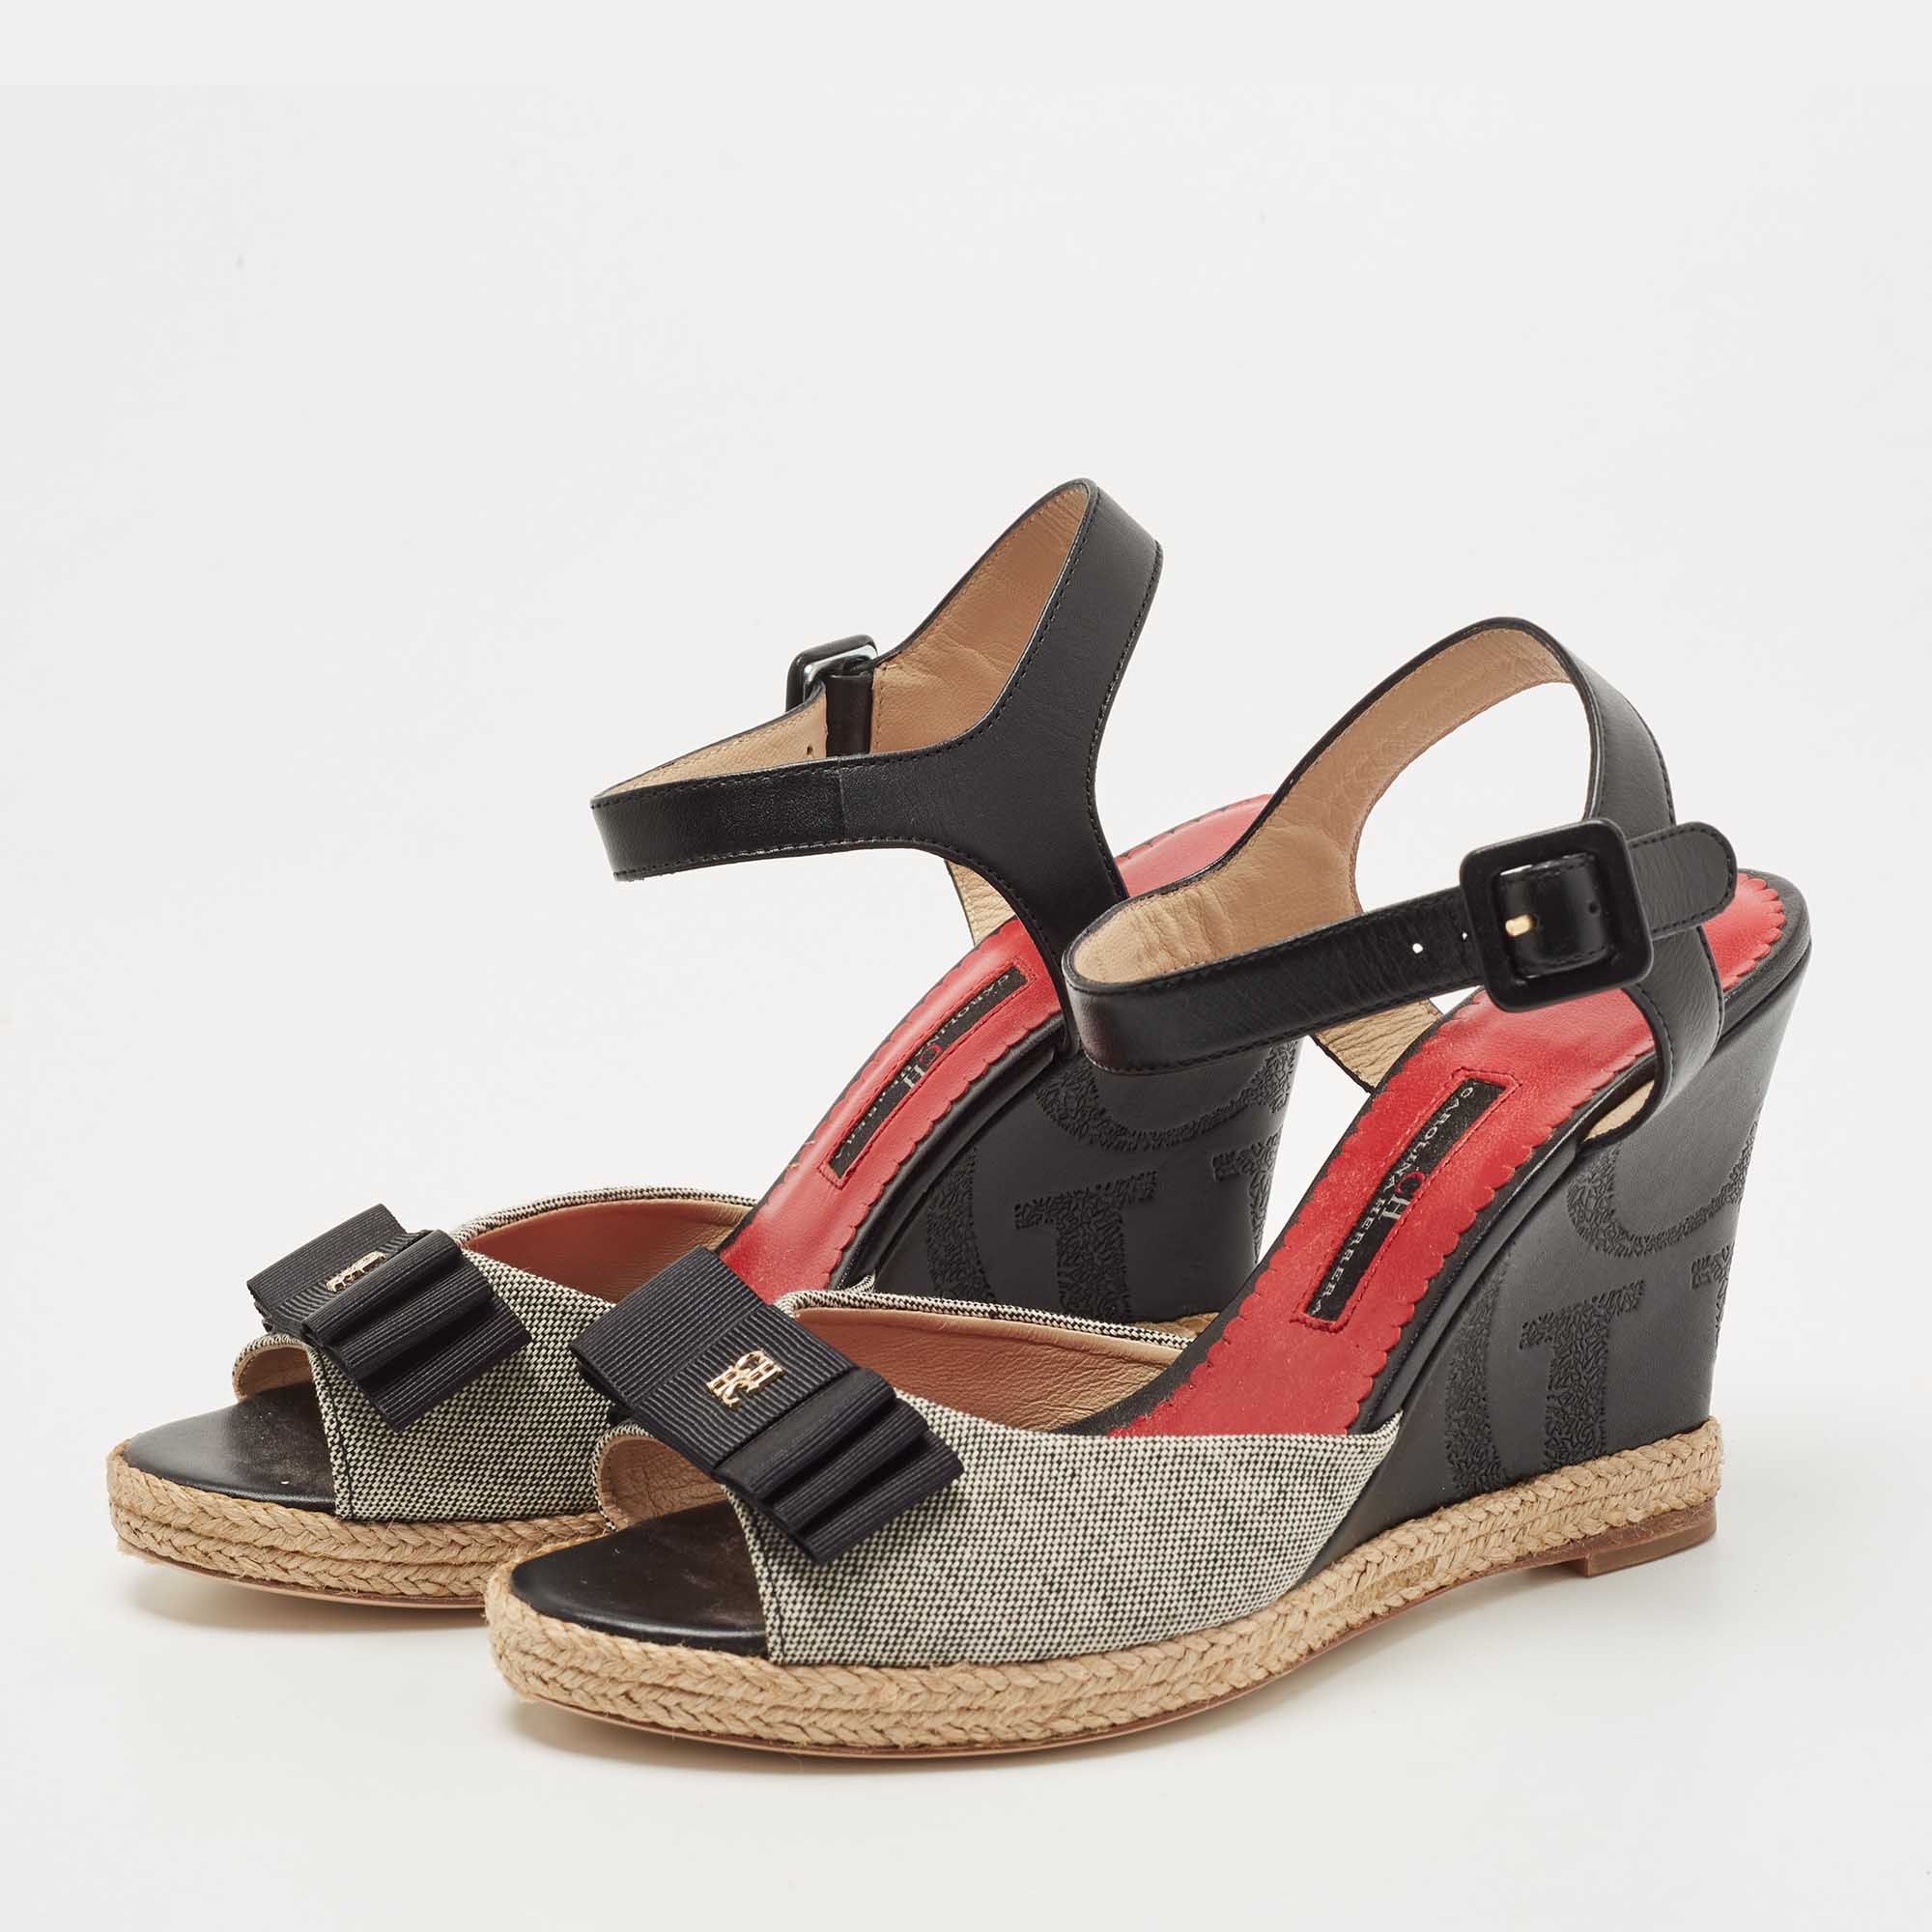 

CH Carolina Herrera Black/Grey Leather and Canvas Wedge Ankle Strap Sandals Size